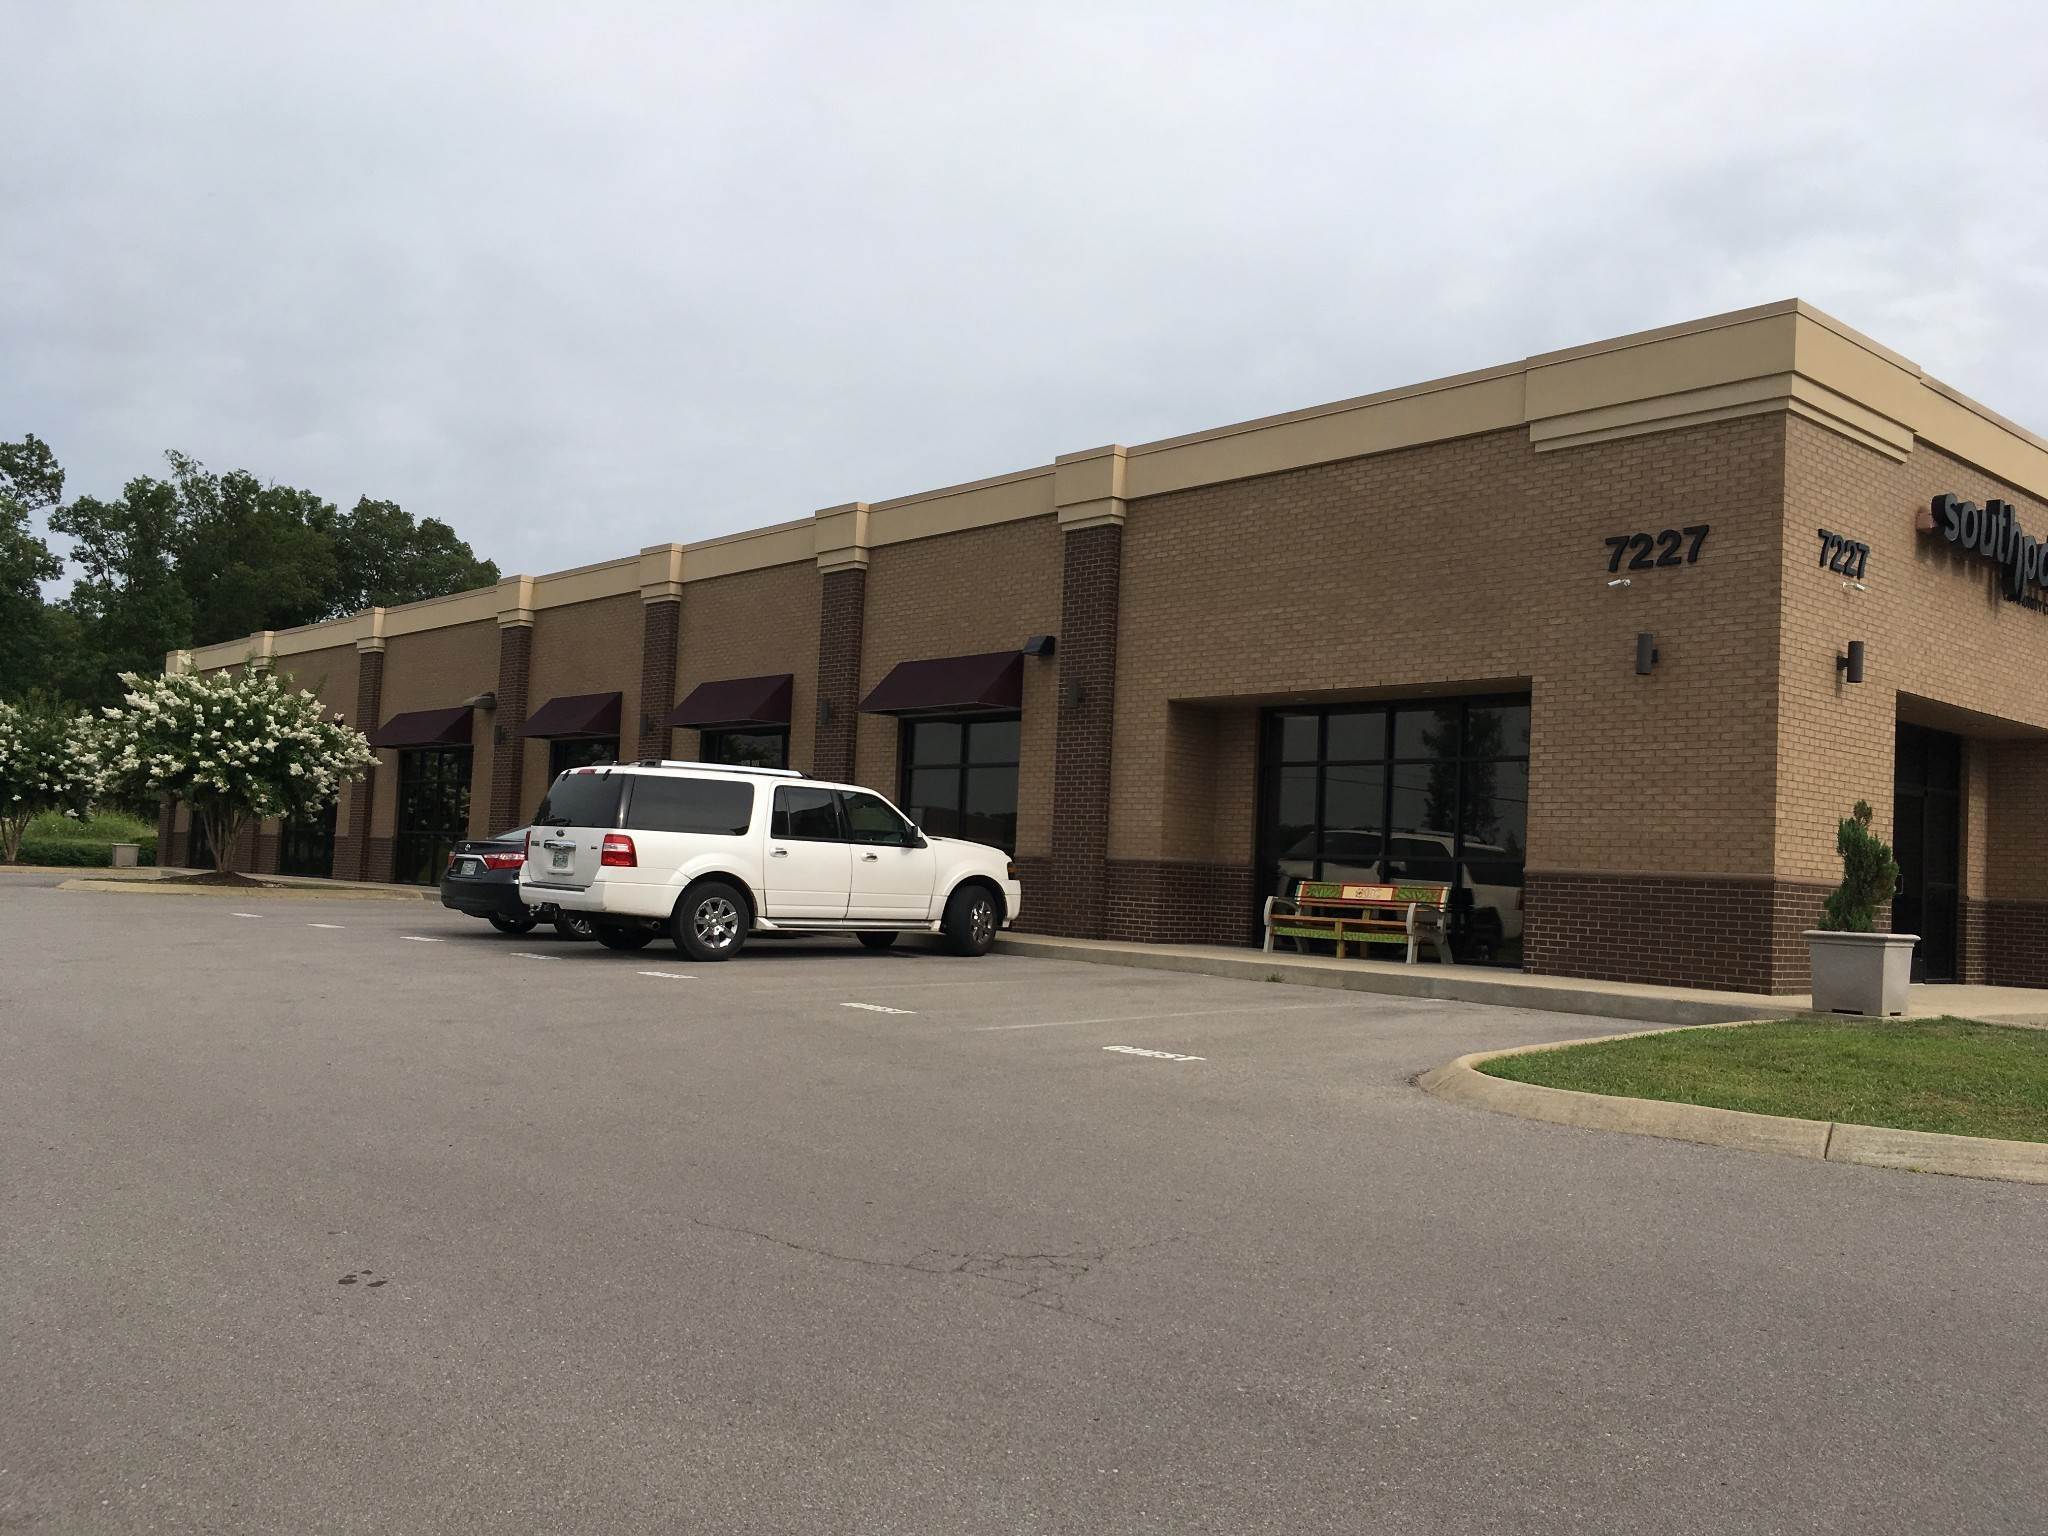 Commercial for Sale at 7227 Haley Industrial Drive Nolensville, Tennessee 37135 United States